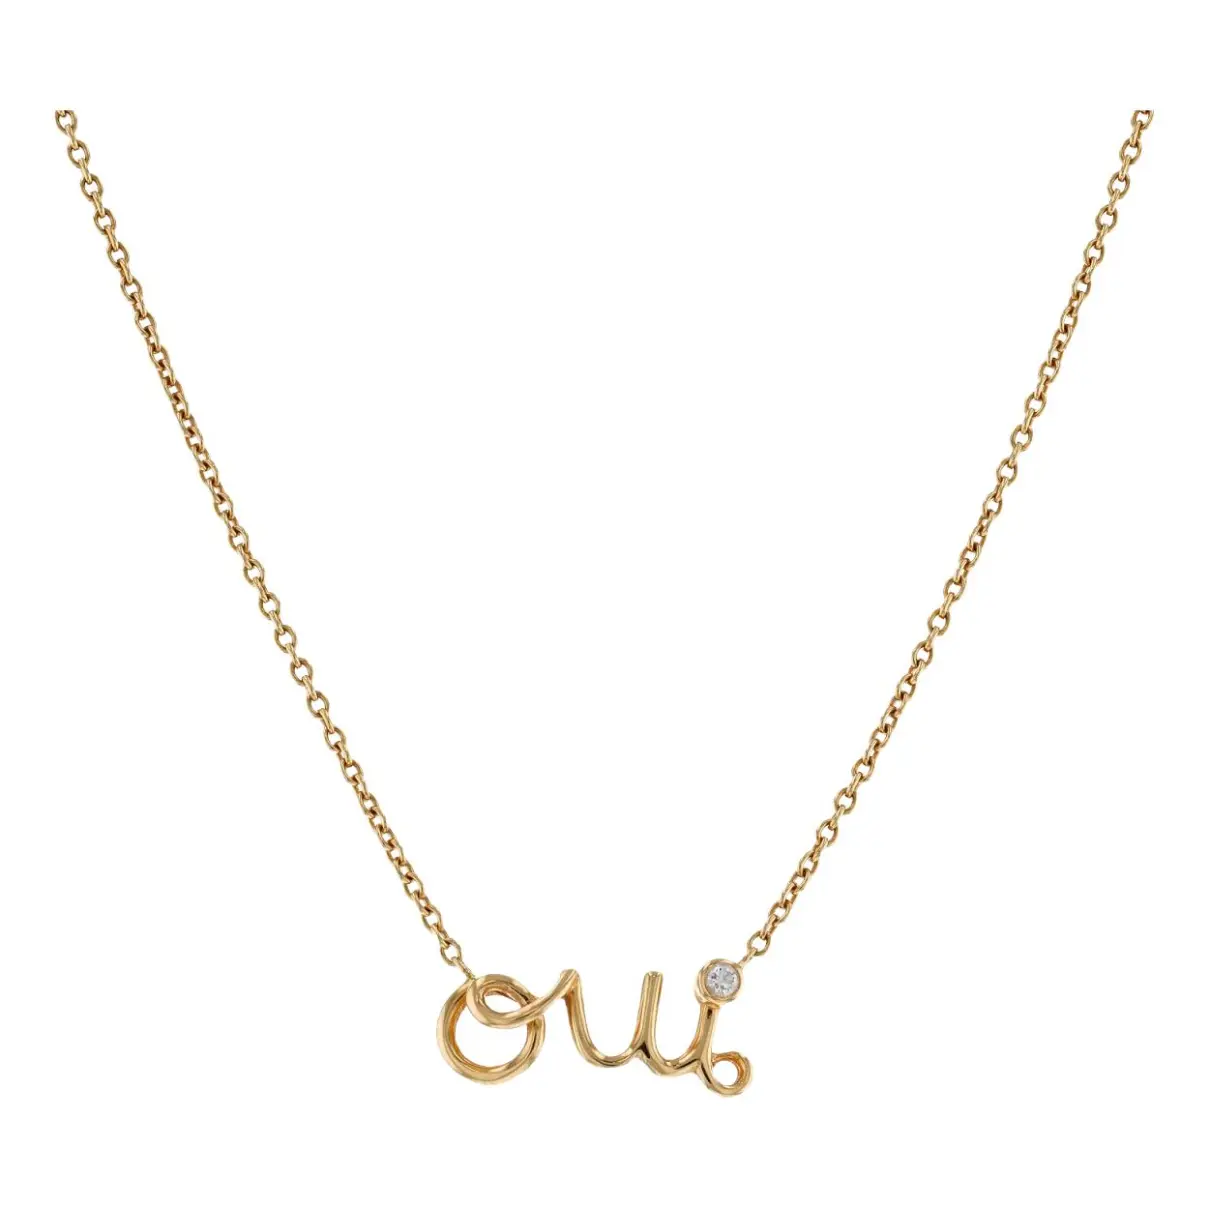 Oui yellow gold necklace